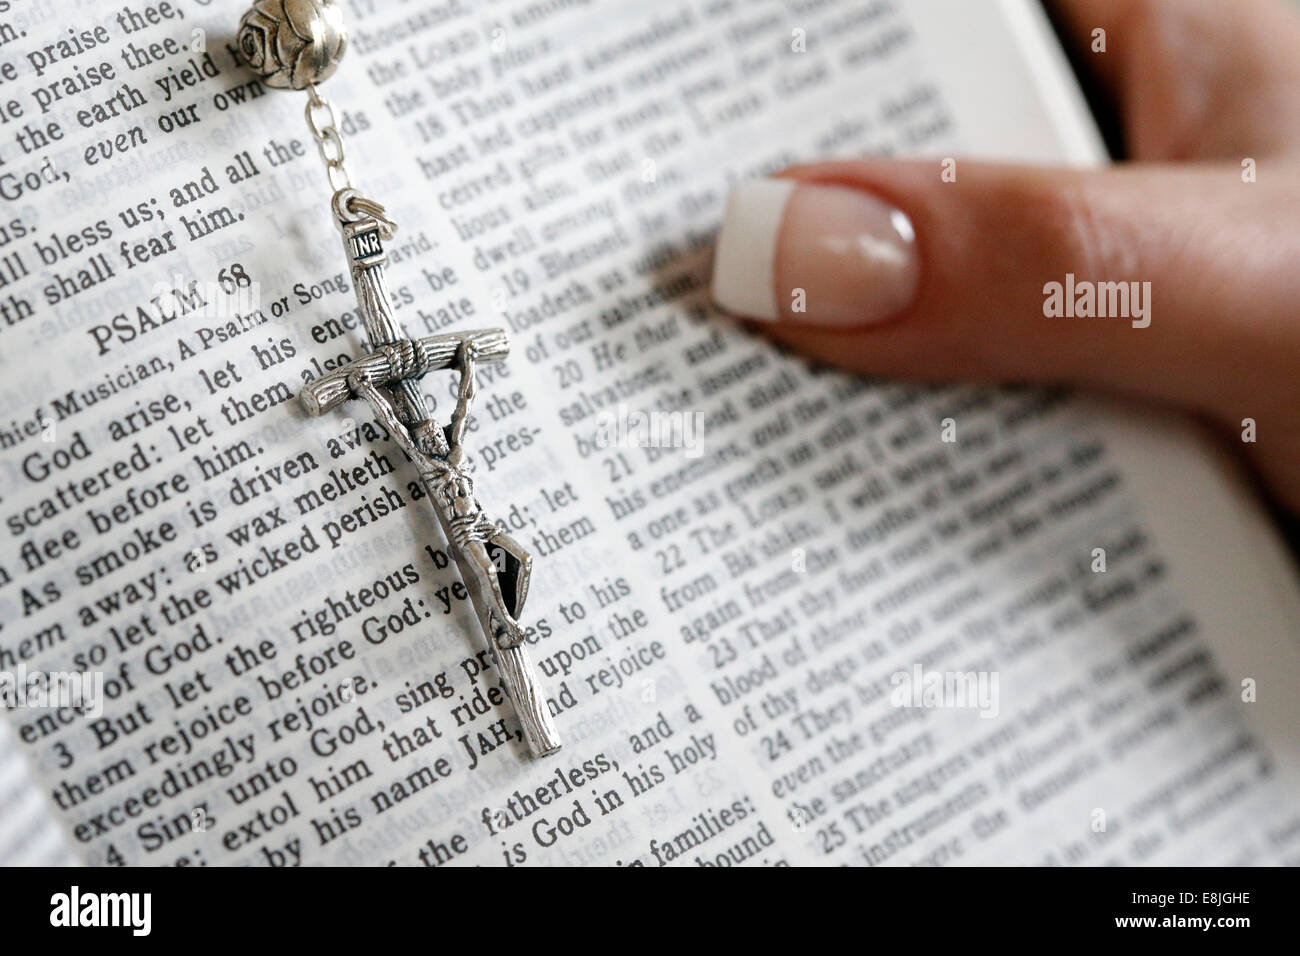 Reading the bible. The psalms. Stock Photo